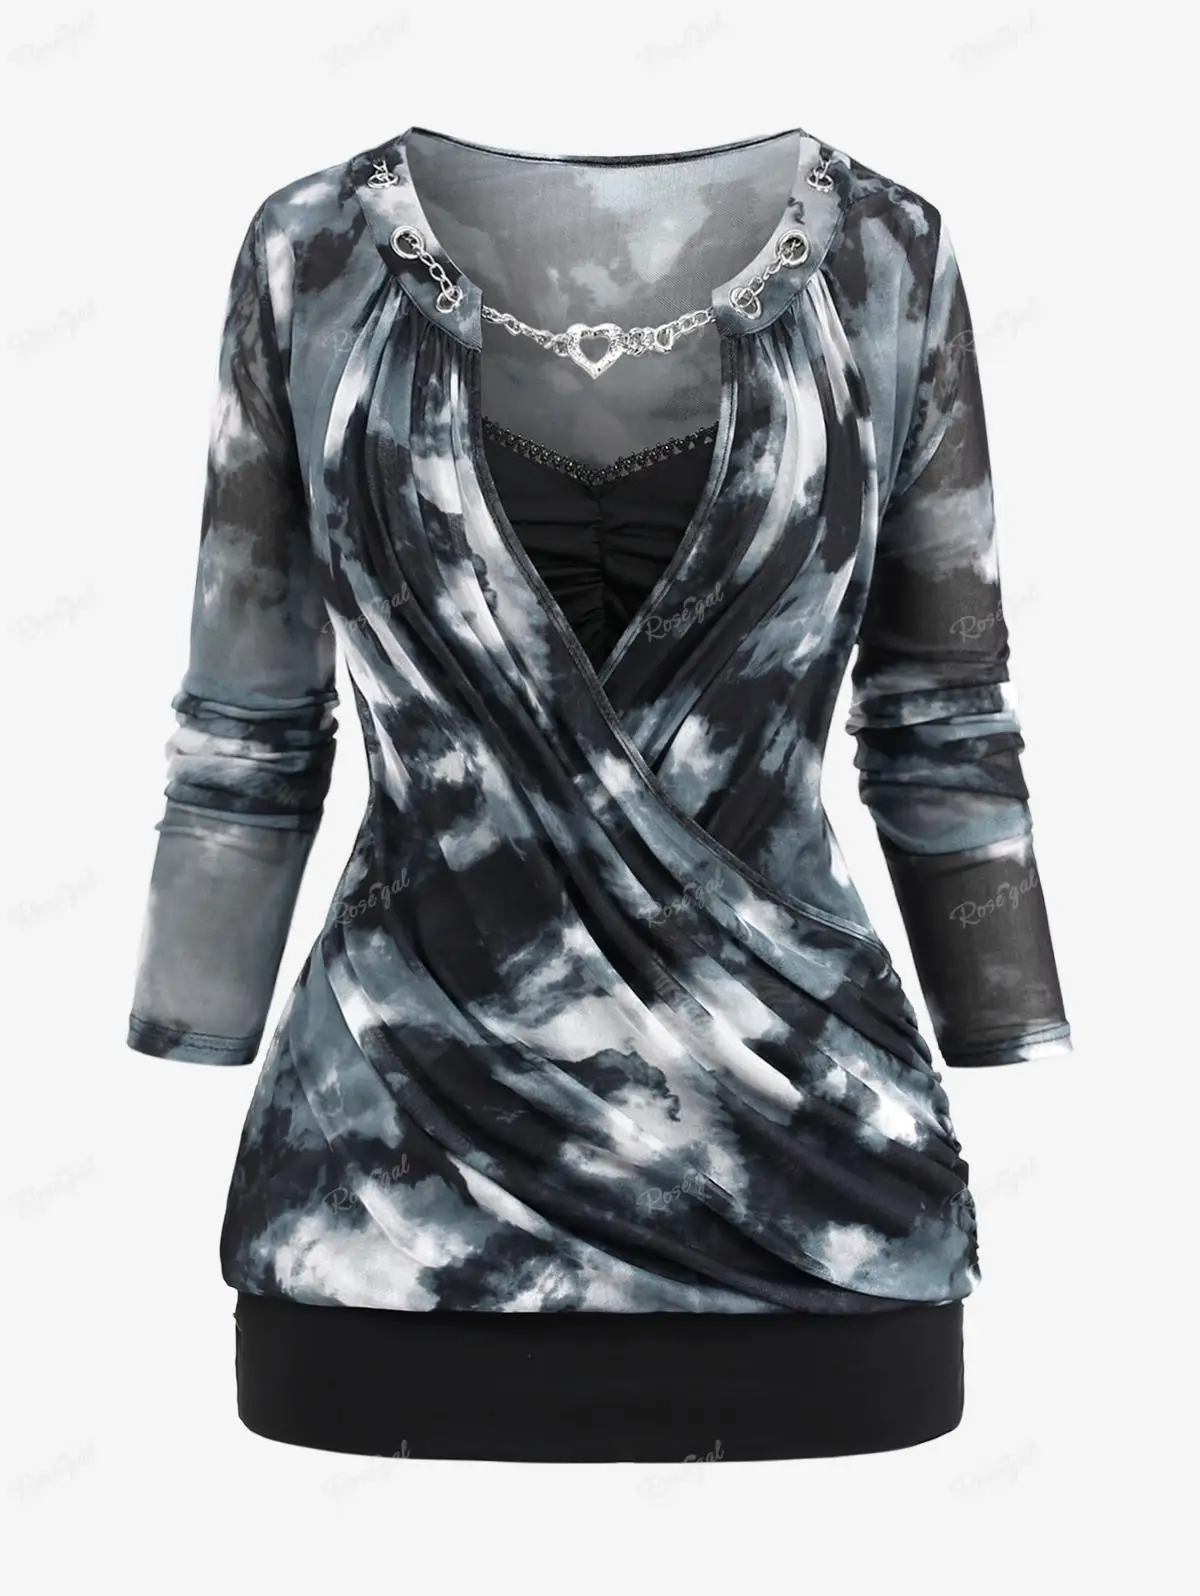 

ROSEGAL Plus Size Ink Painting Print Surplice T-shirt Chain Panel Ruched Lace Trim Tops Female Casual Long Sleeve Tees Blouses